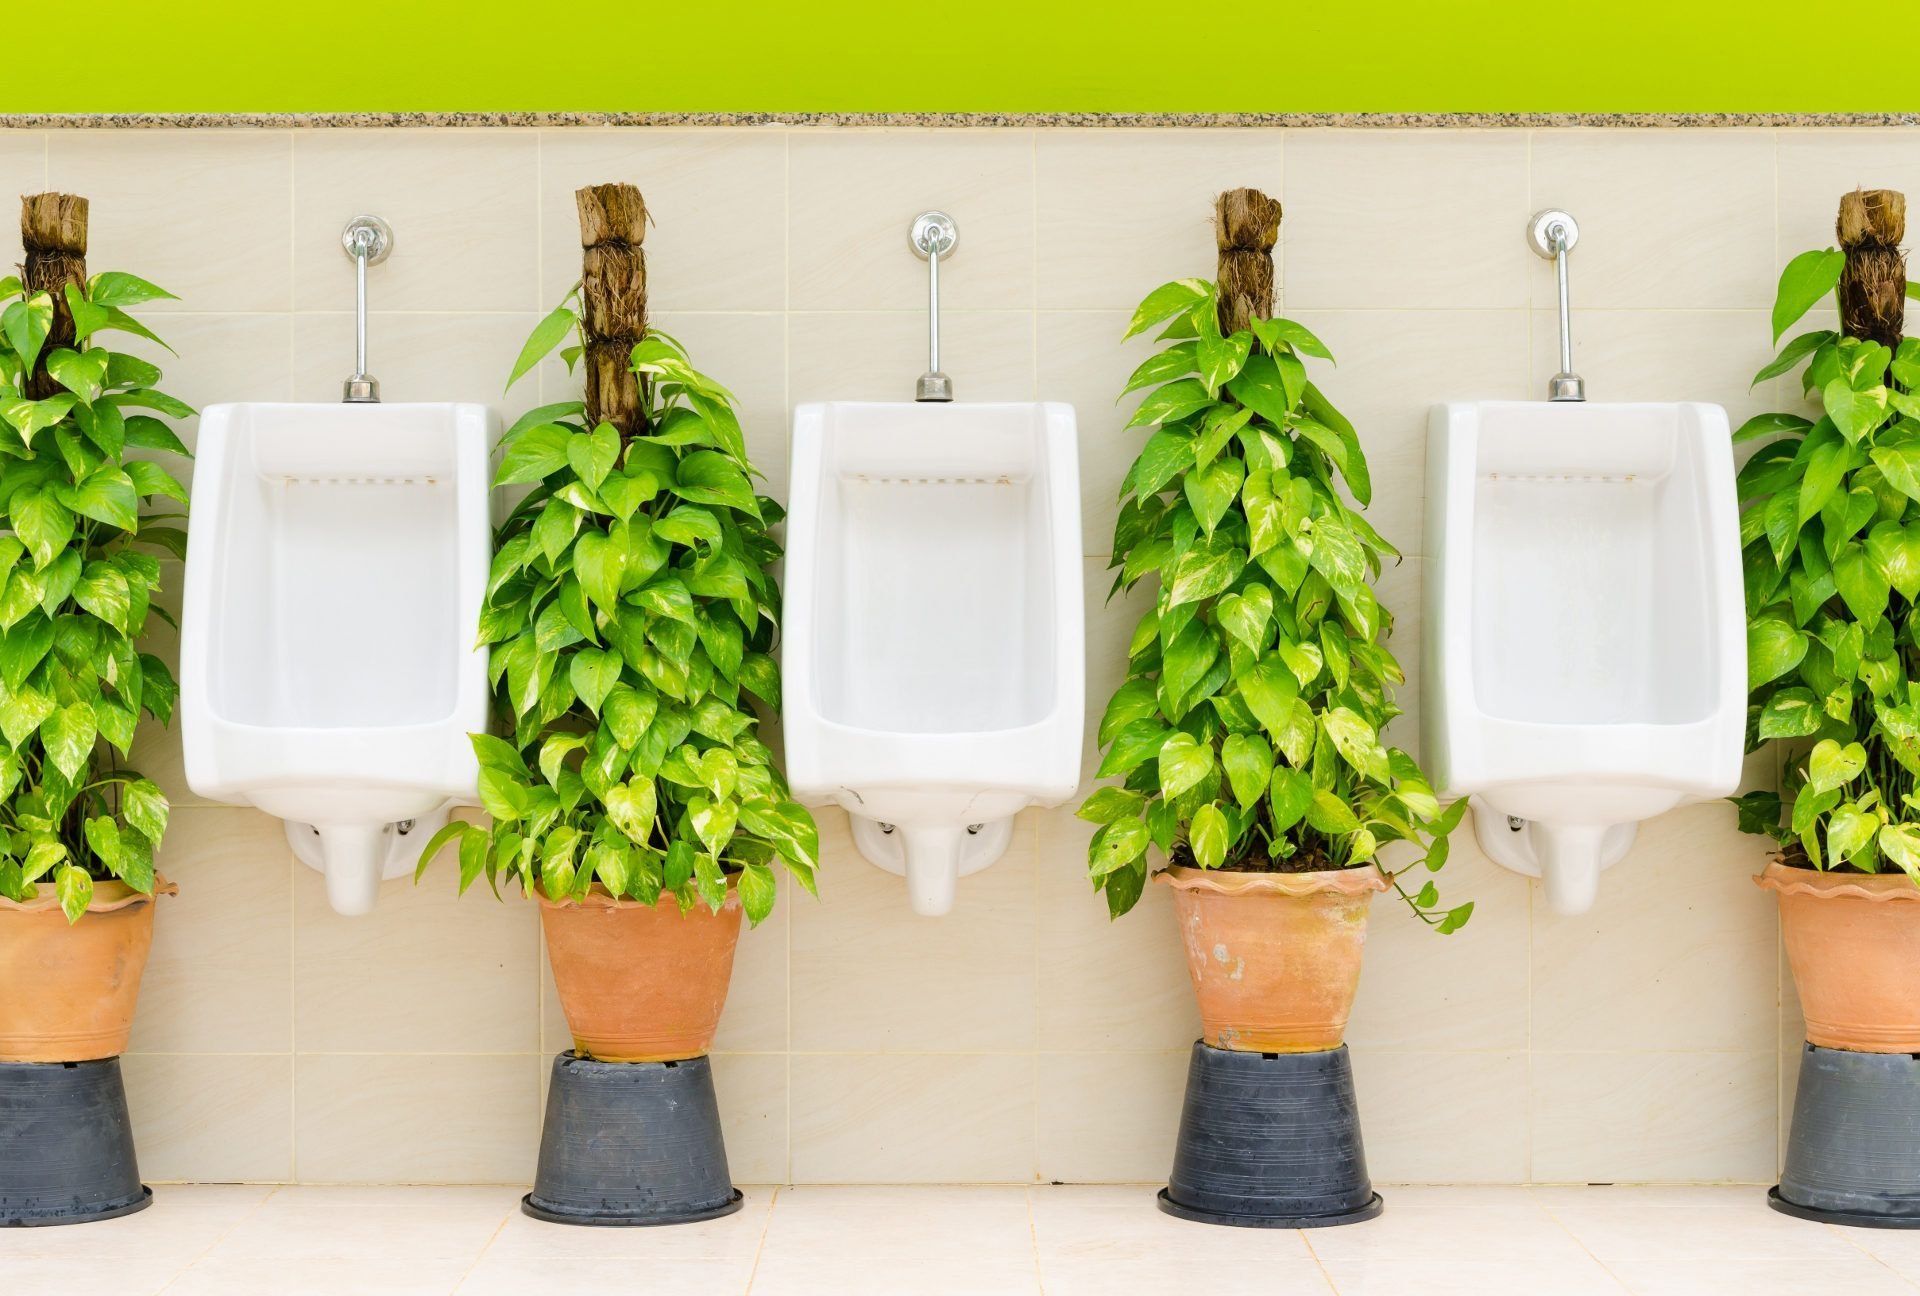 Ranking the best urinals 2022: how to choose